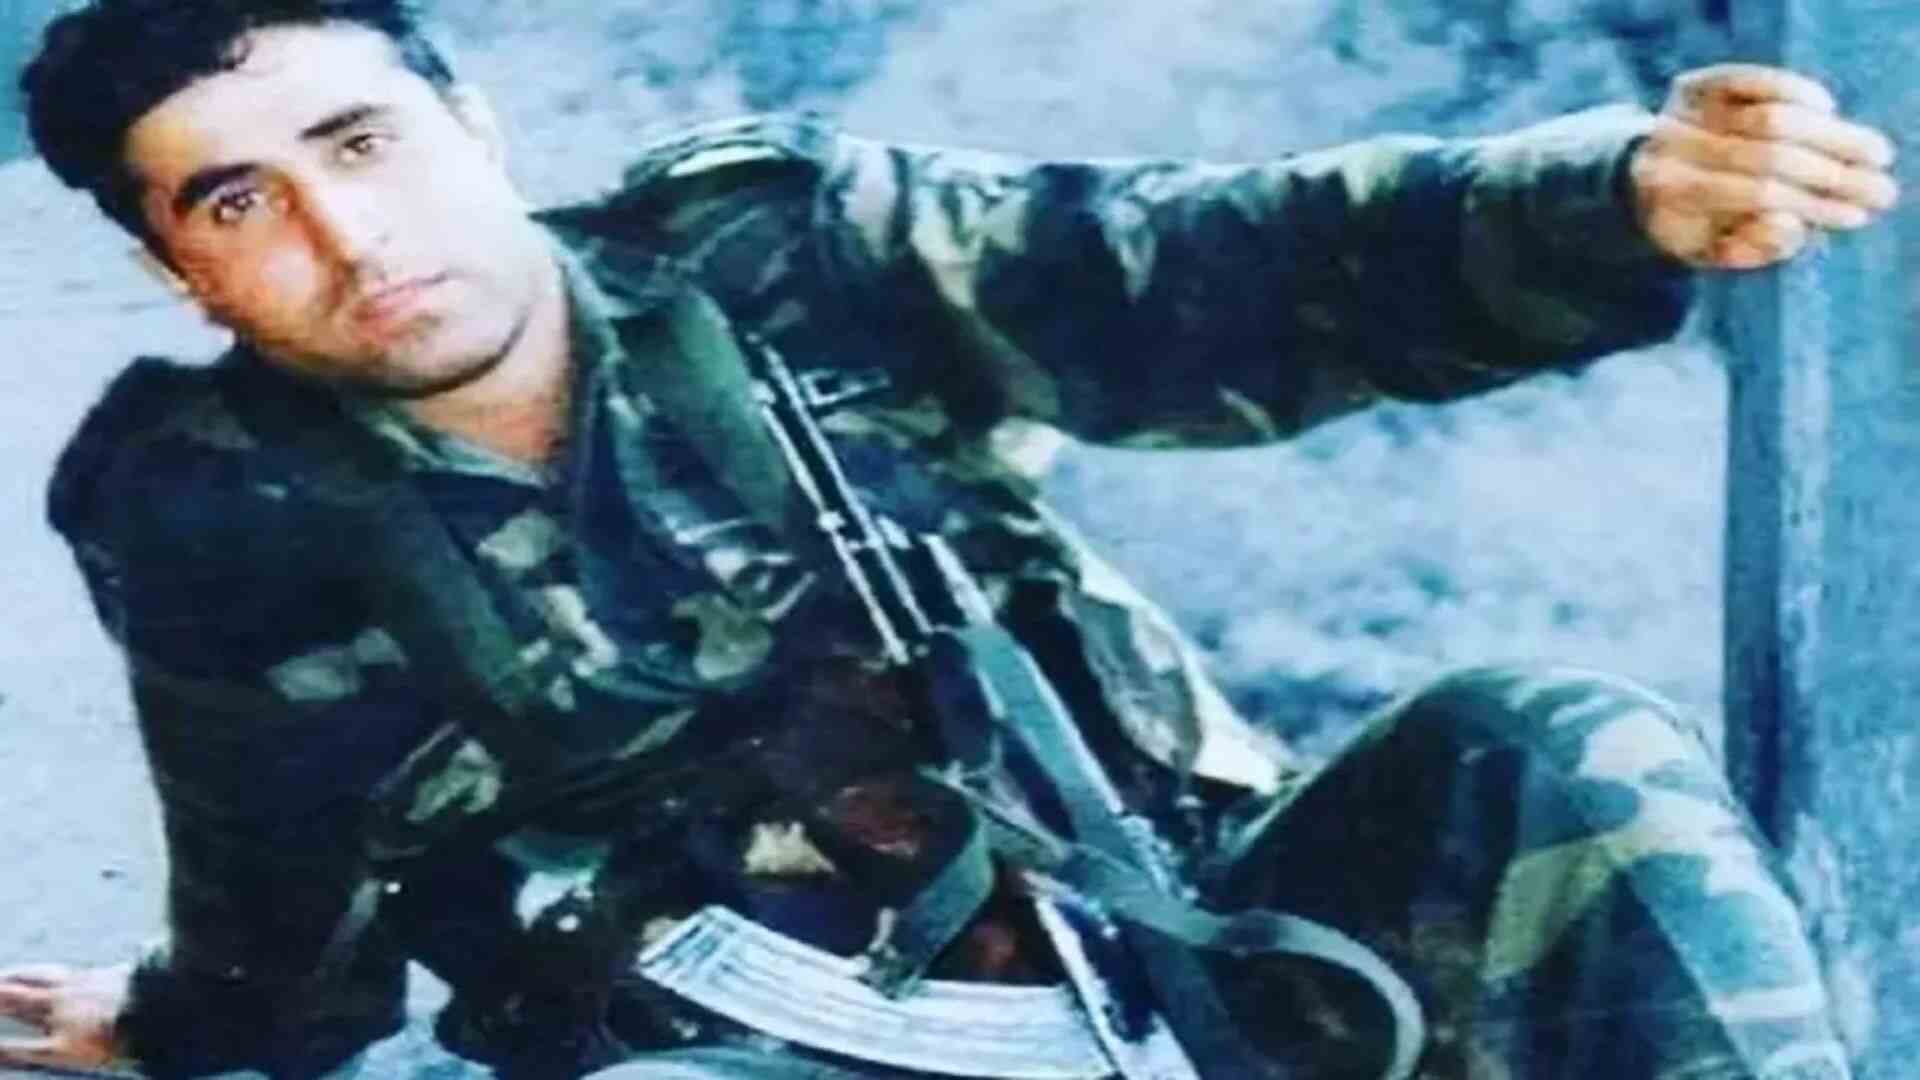 Kargil War Anniversary: Captain Vikram Batra’s Brother Cries This Famous Slogan While Remembering The Soldier